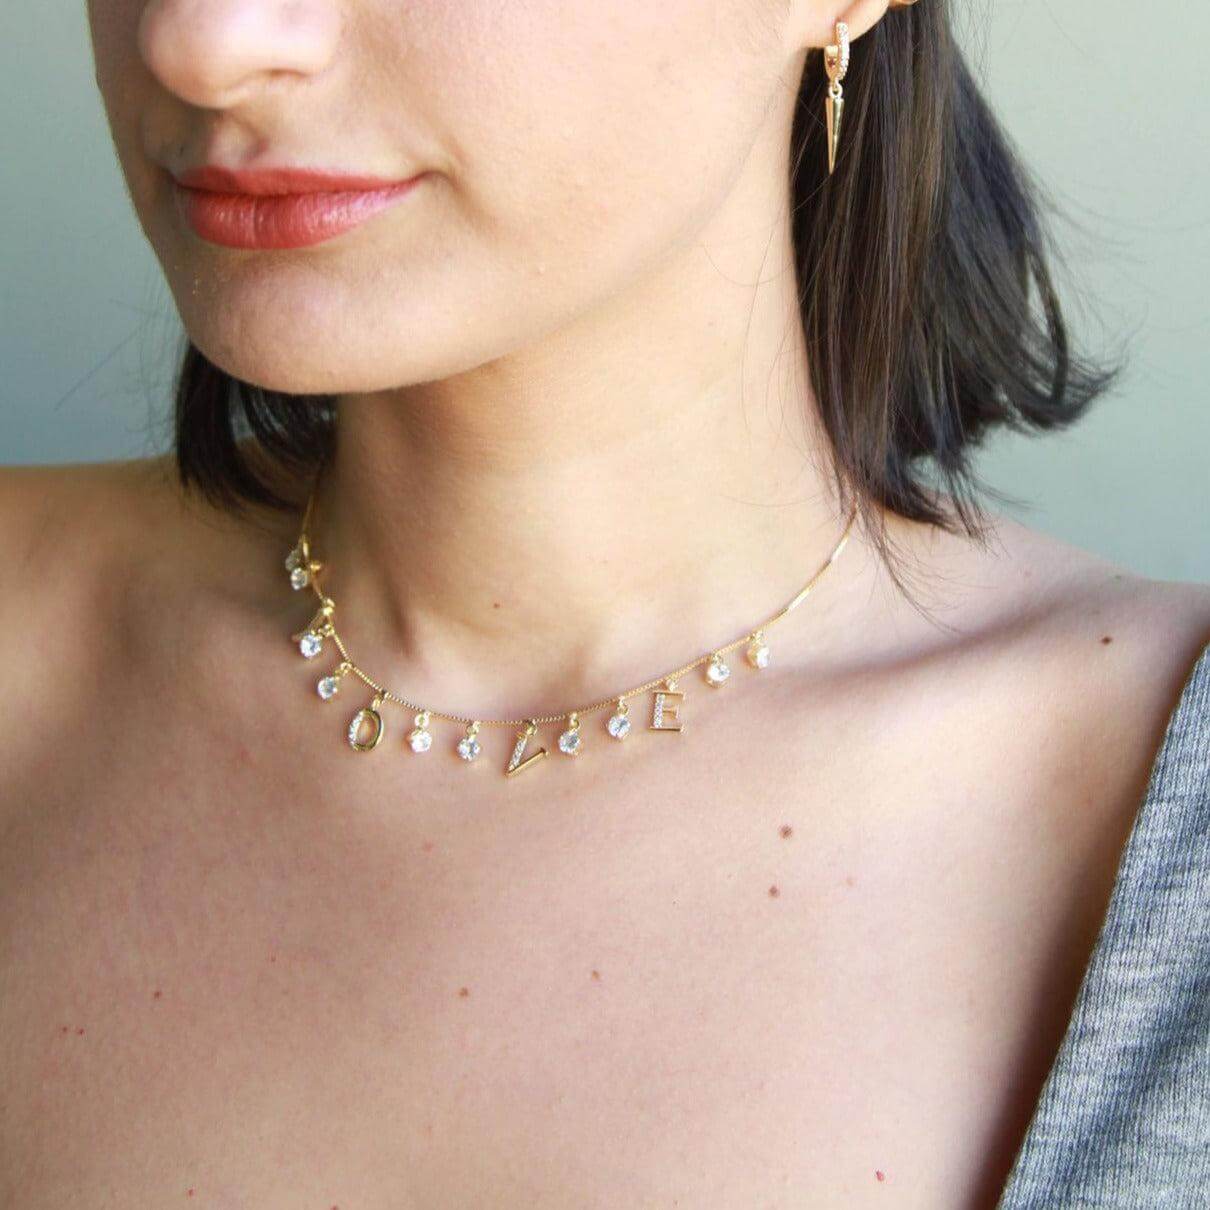 18k Gold Filled "LOVE" Necklace or Choker Featuring Adjustable Extender